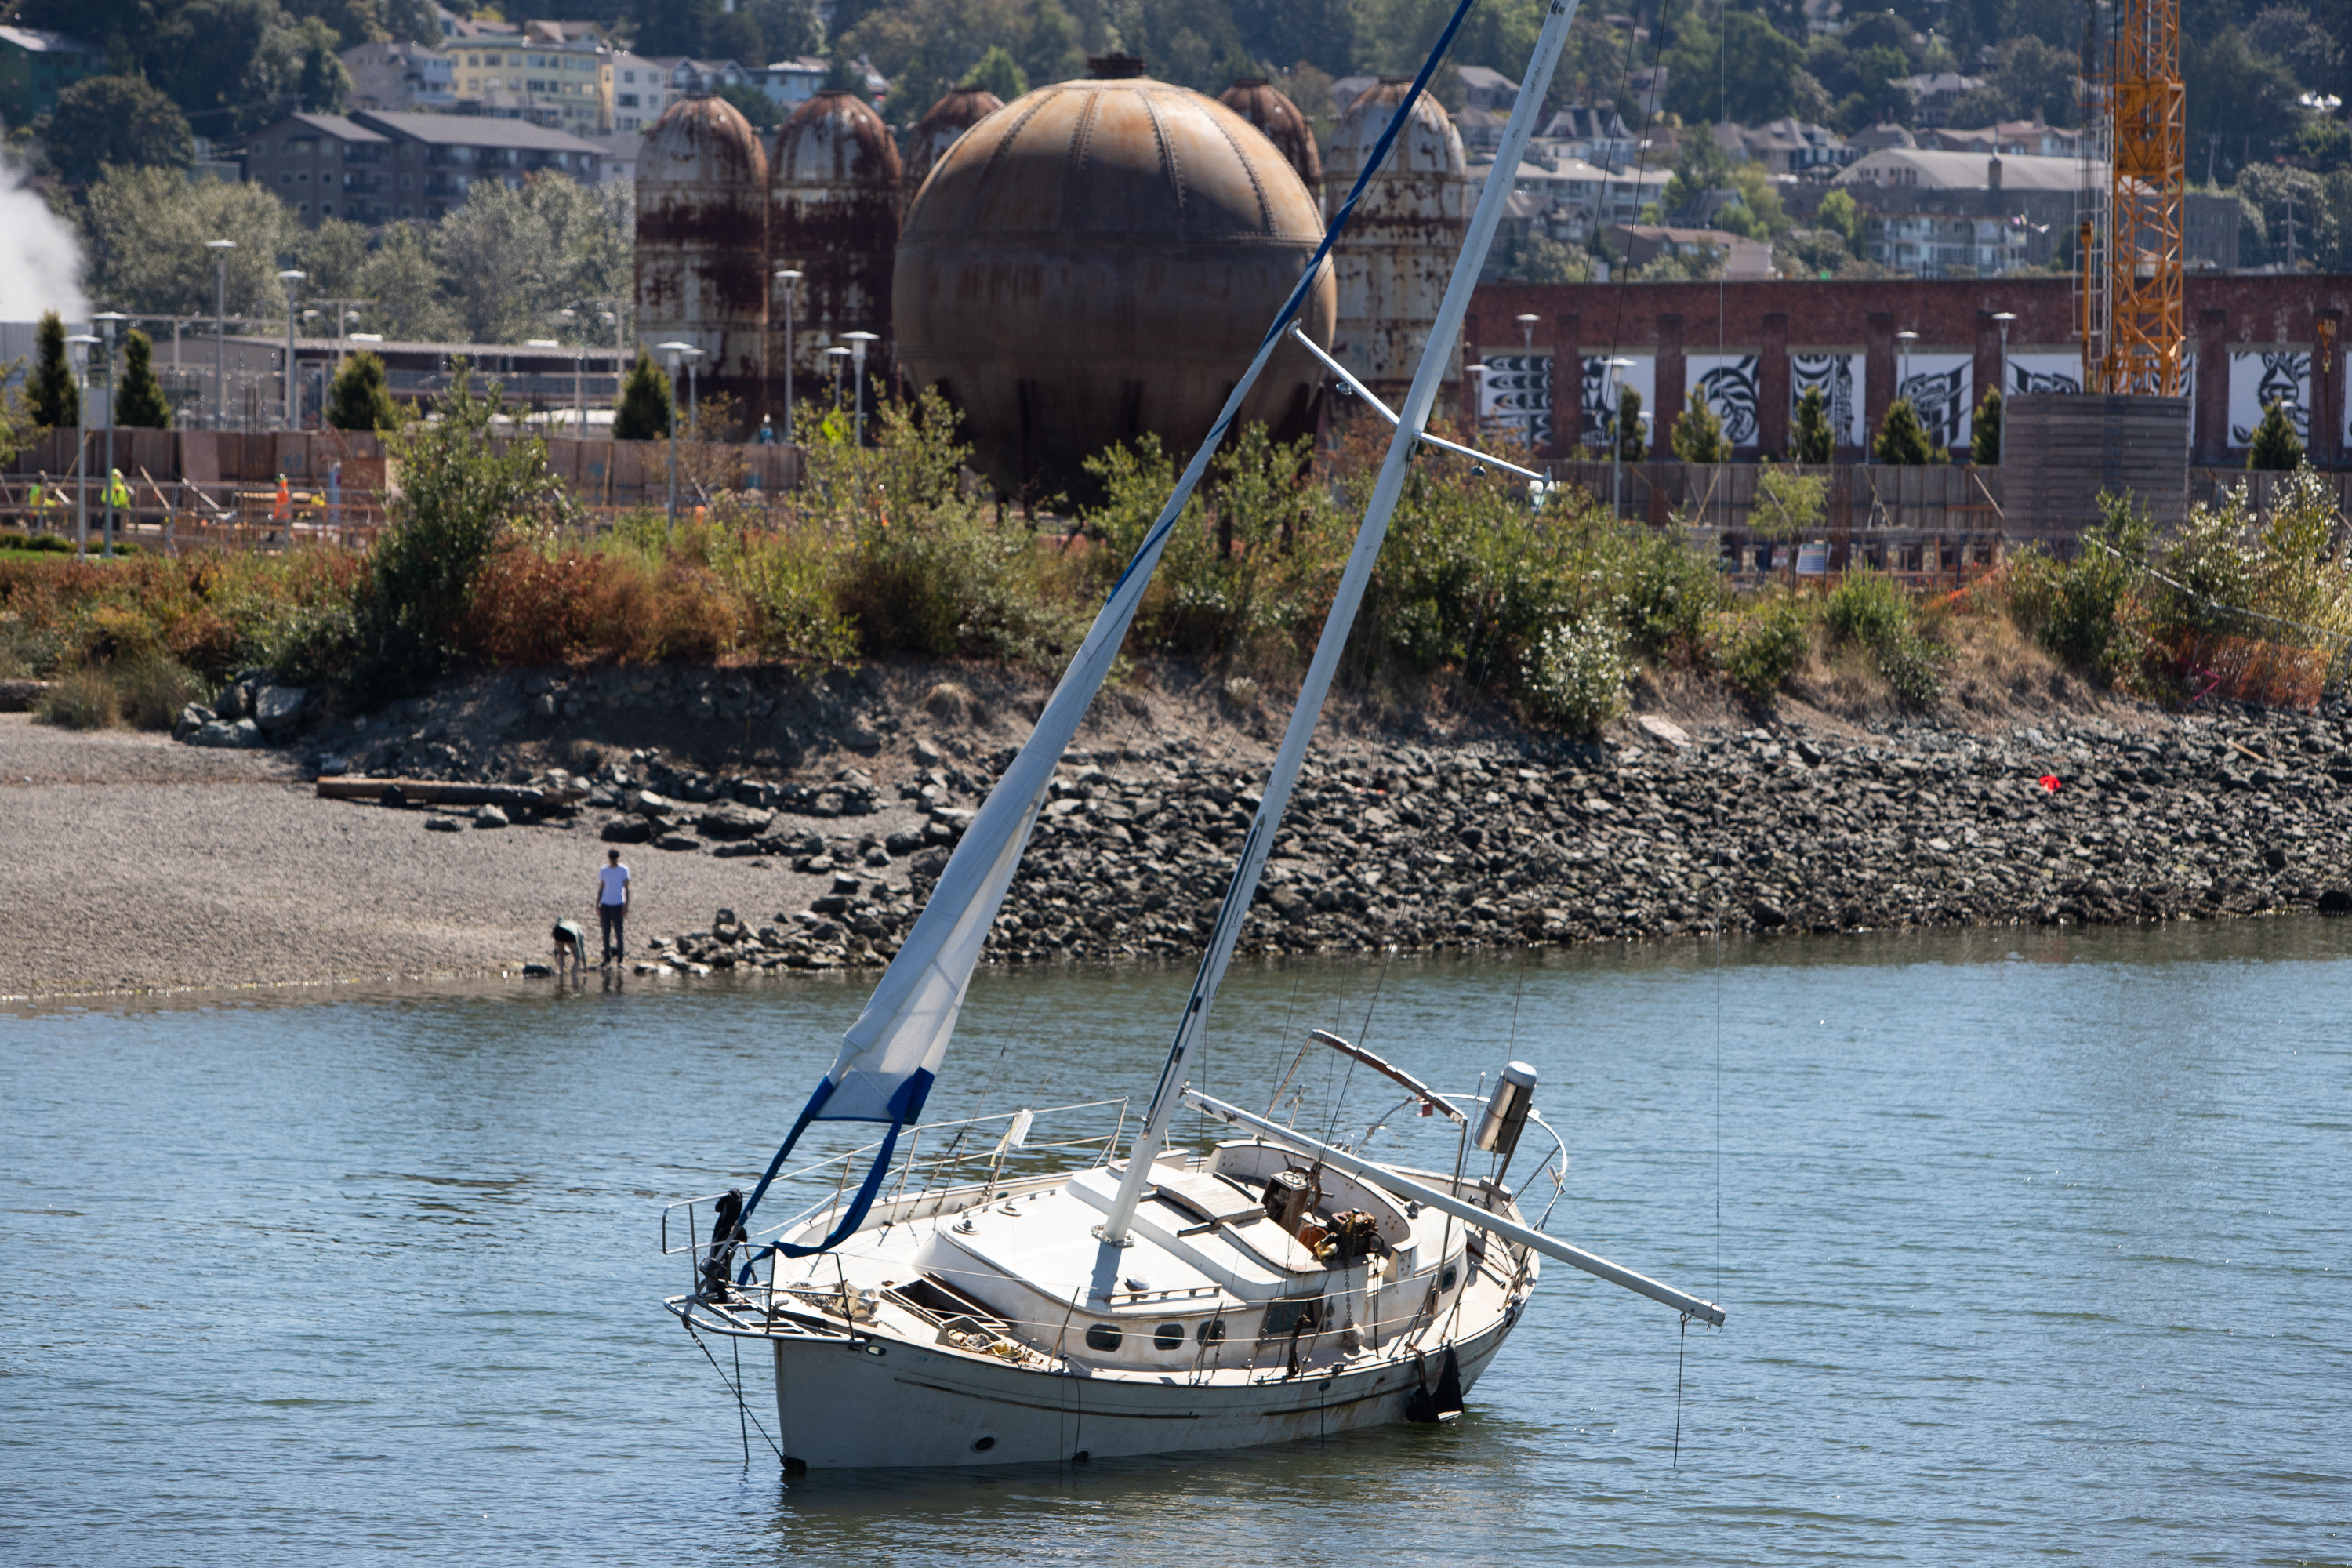 Hands off: Best to leave that grounded sailboat to rot in place, just like the 